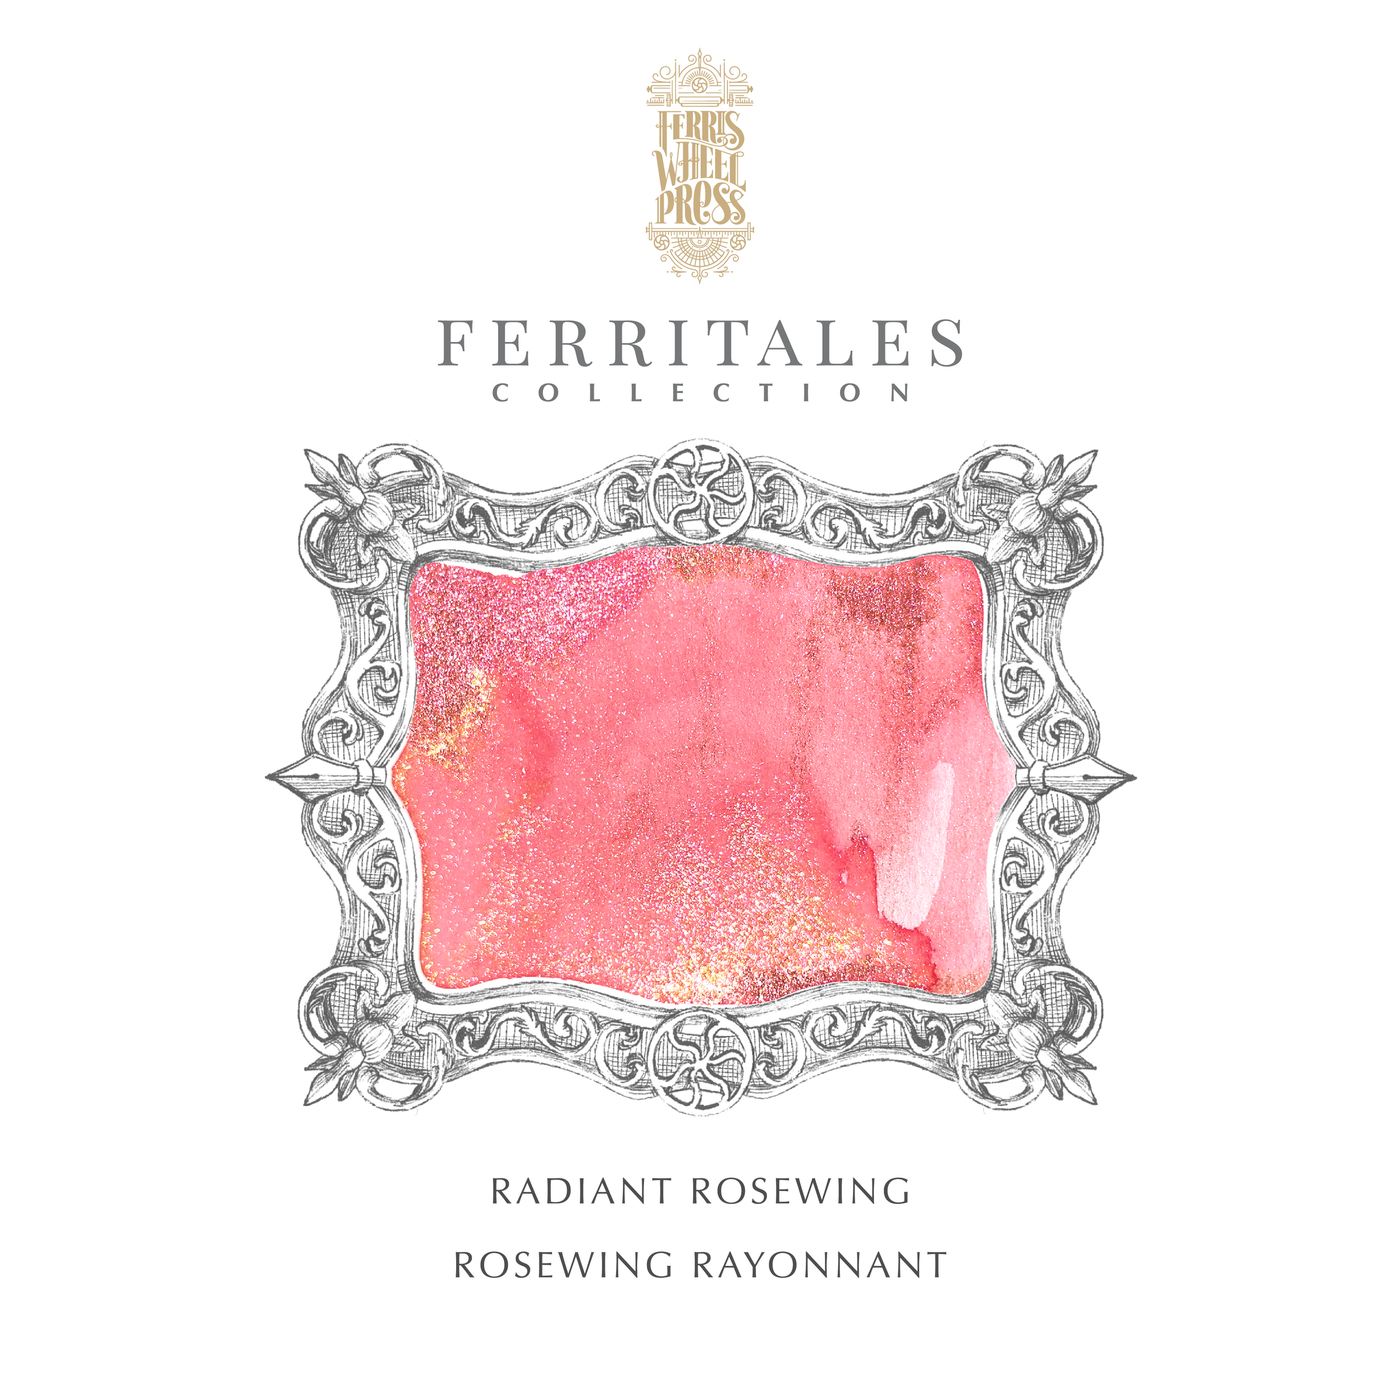 Ferris Wheel Press Radiant Rosewing- 85ml bottled Ink (Special Edition)